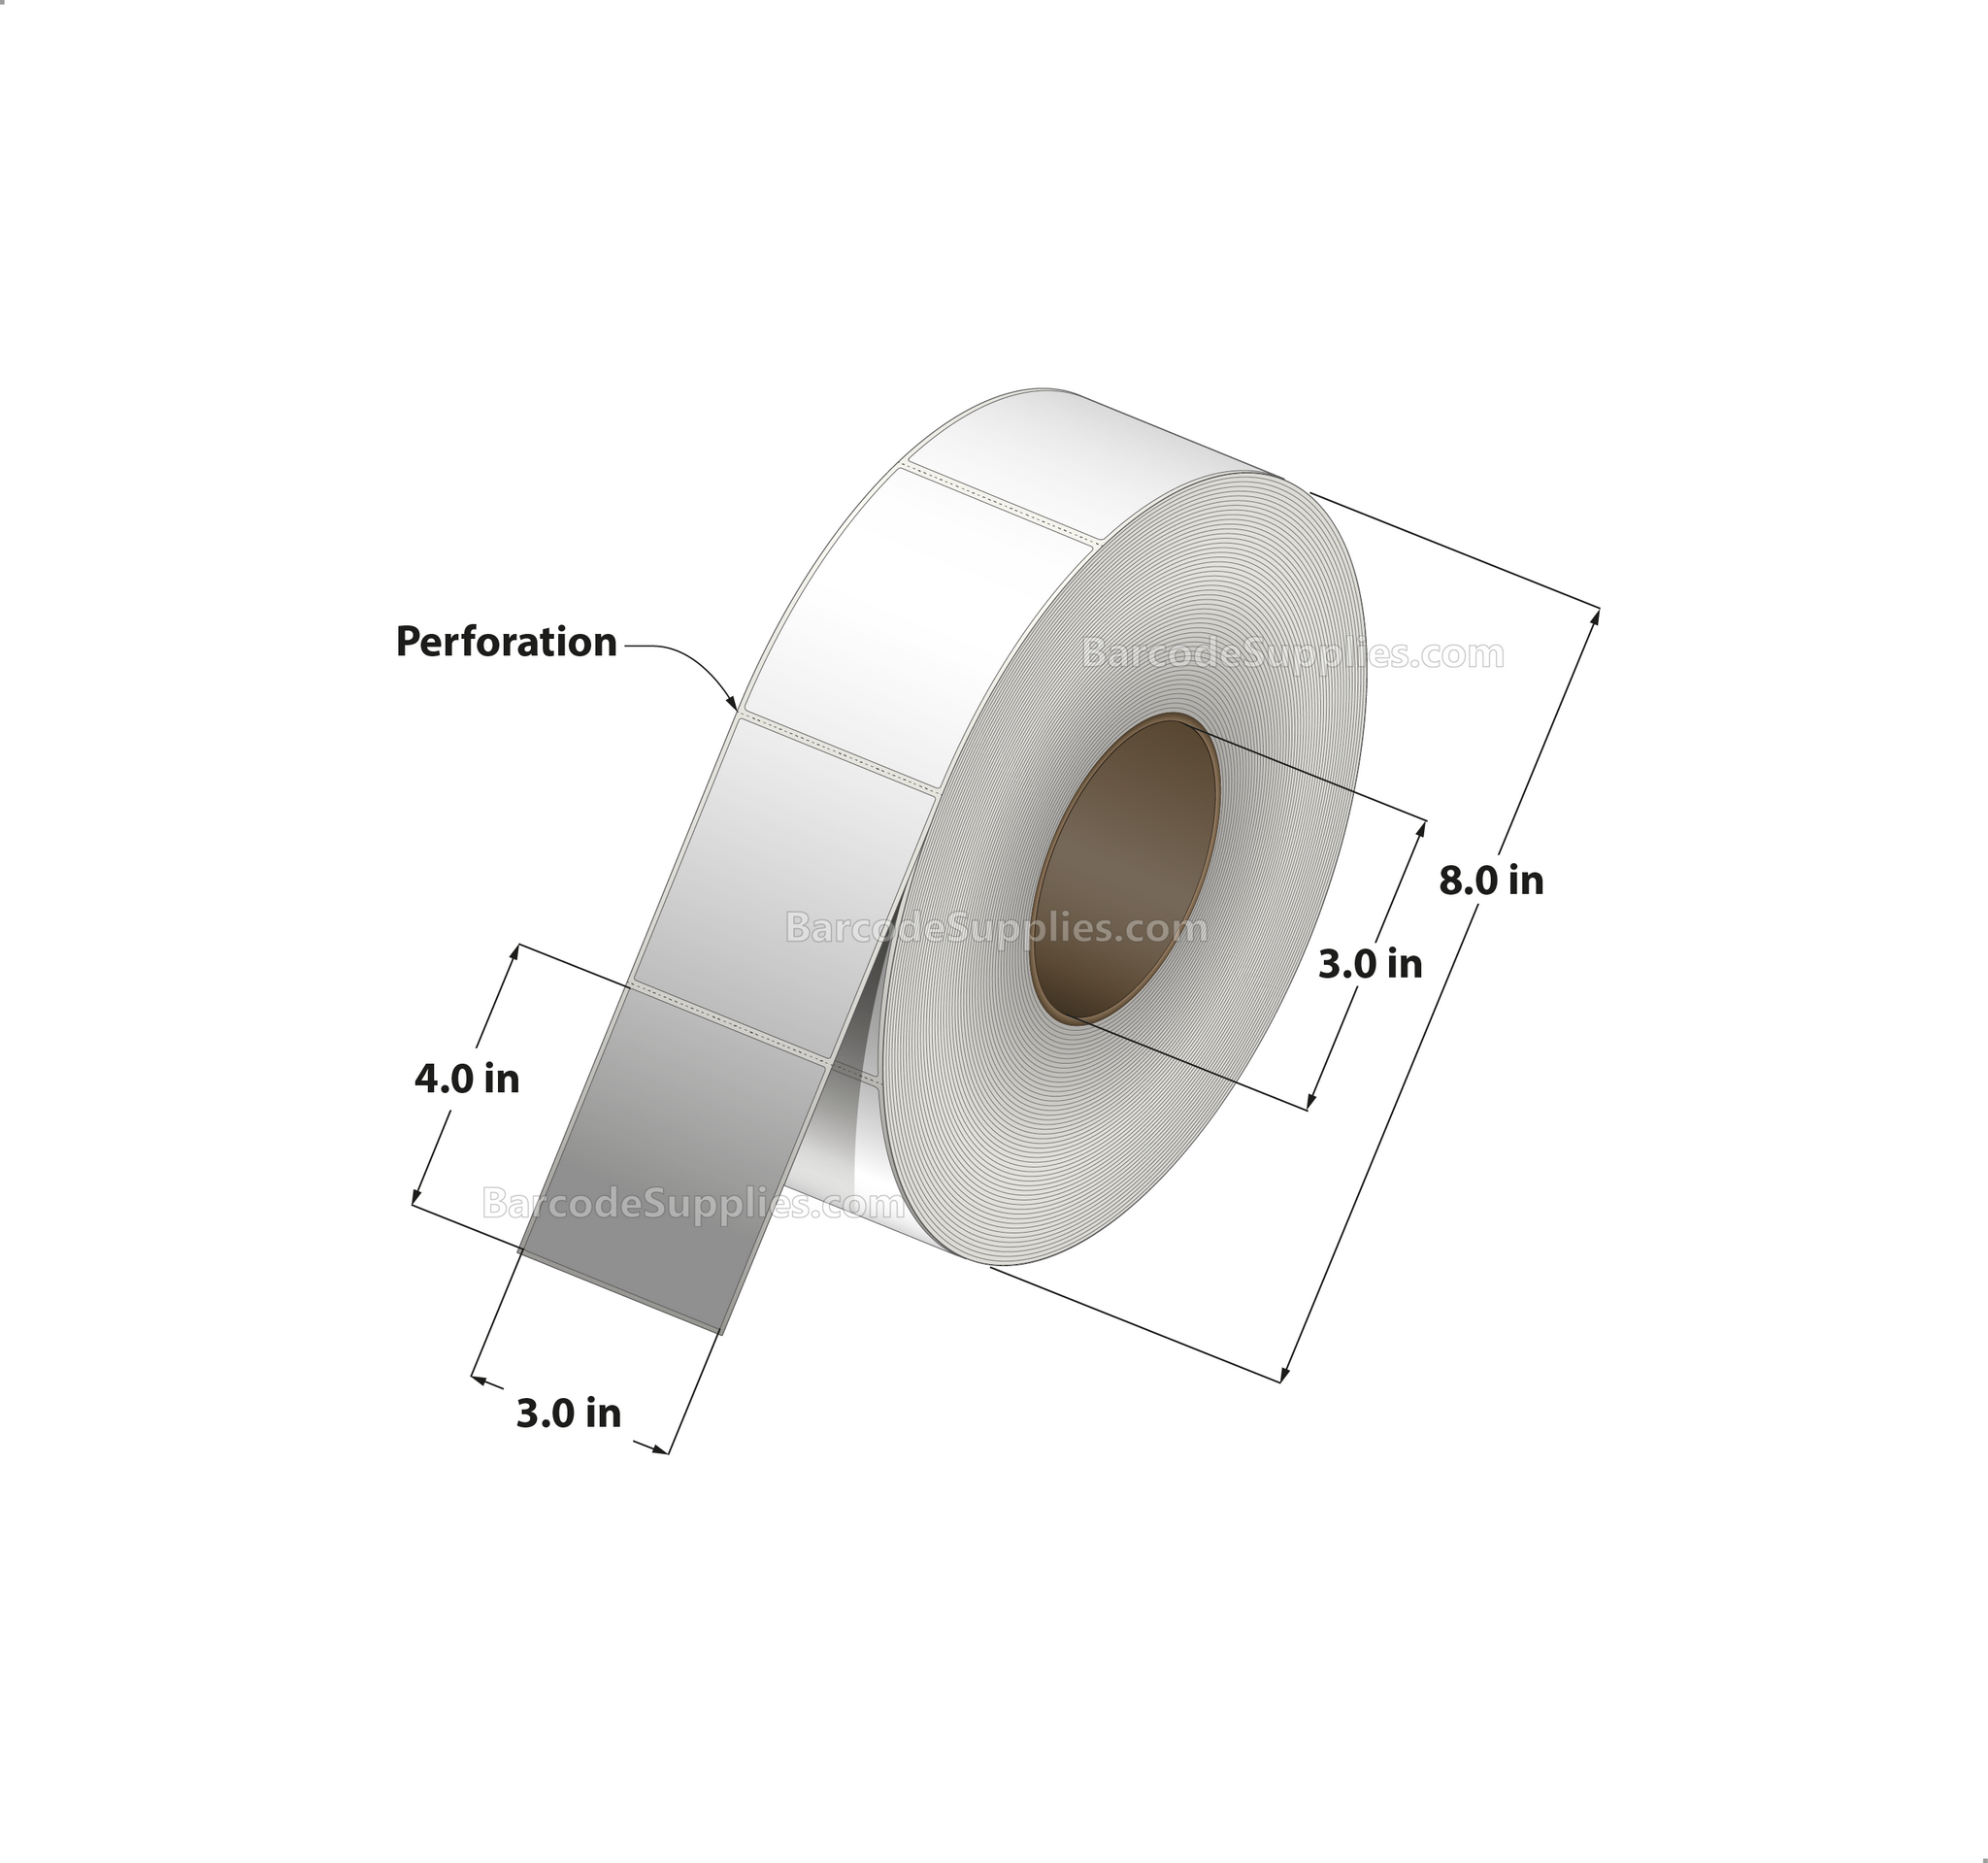 3 x 4 Thermal Transfer White Labels With Permanent Adhesive - Perforated - 1500 Labels Per Roll - Carton Of 8 Rolls - 12000 Labels Total - MPN: RT-3-4-1500-3